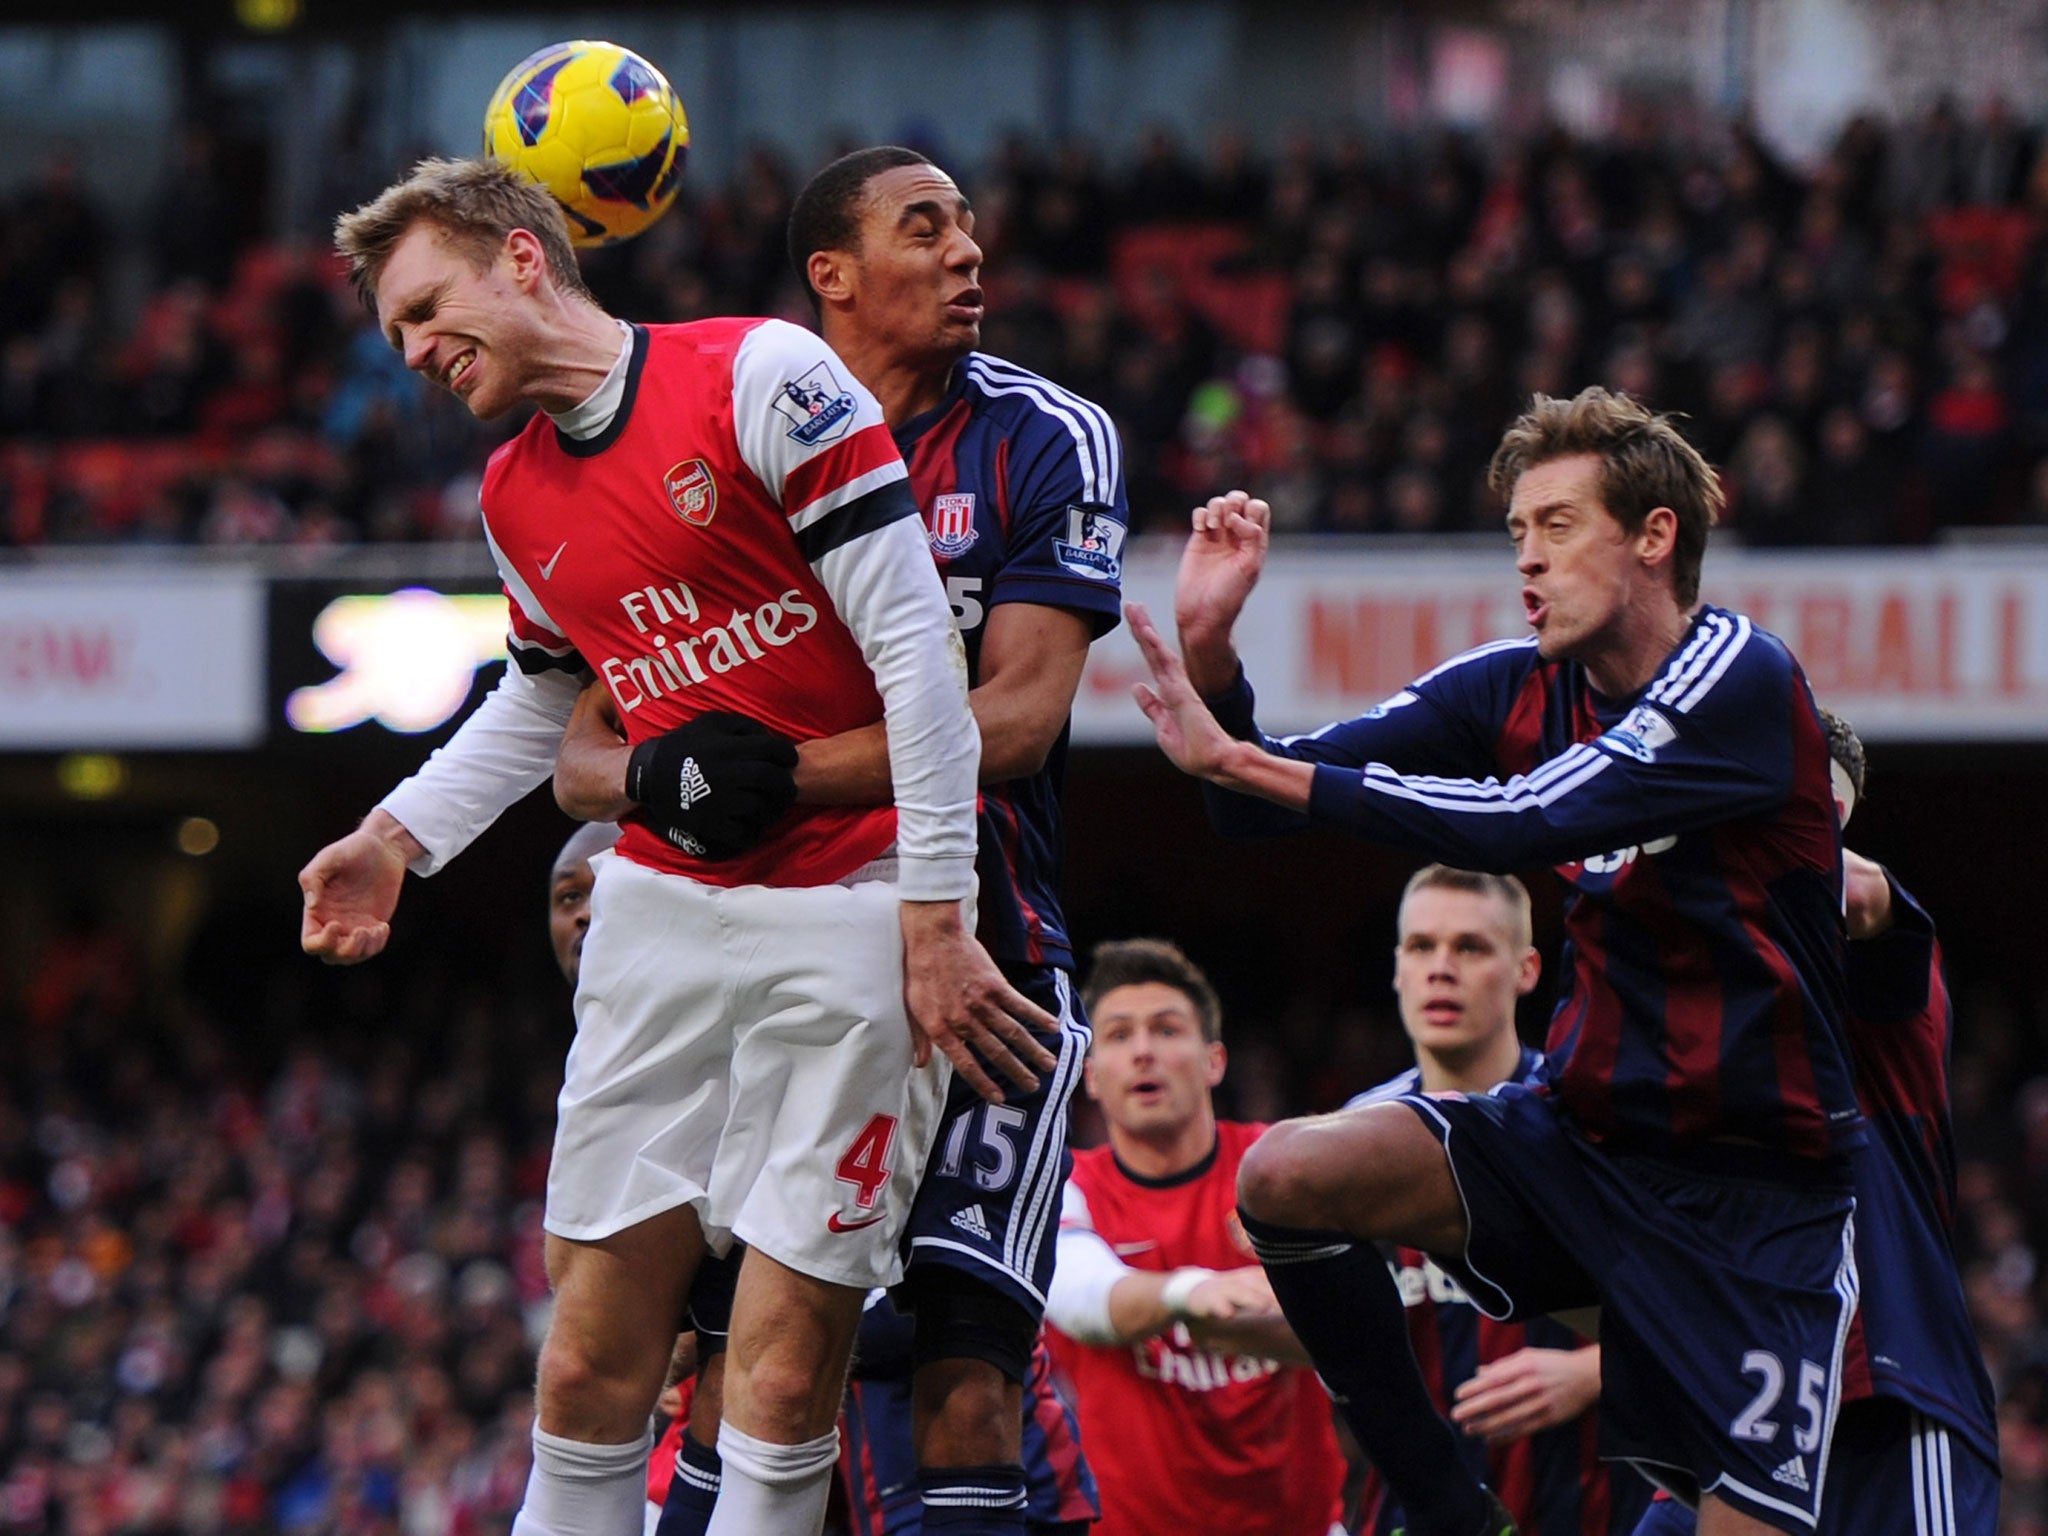 Per Mertesacker of Arsenal competes for the ball against Steven N'Zonzi and Peter Crouch